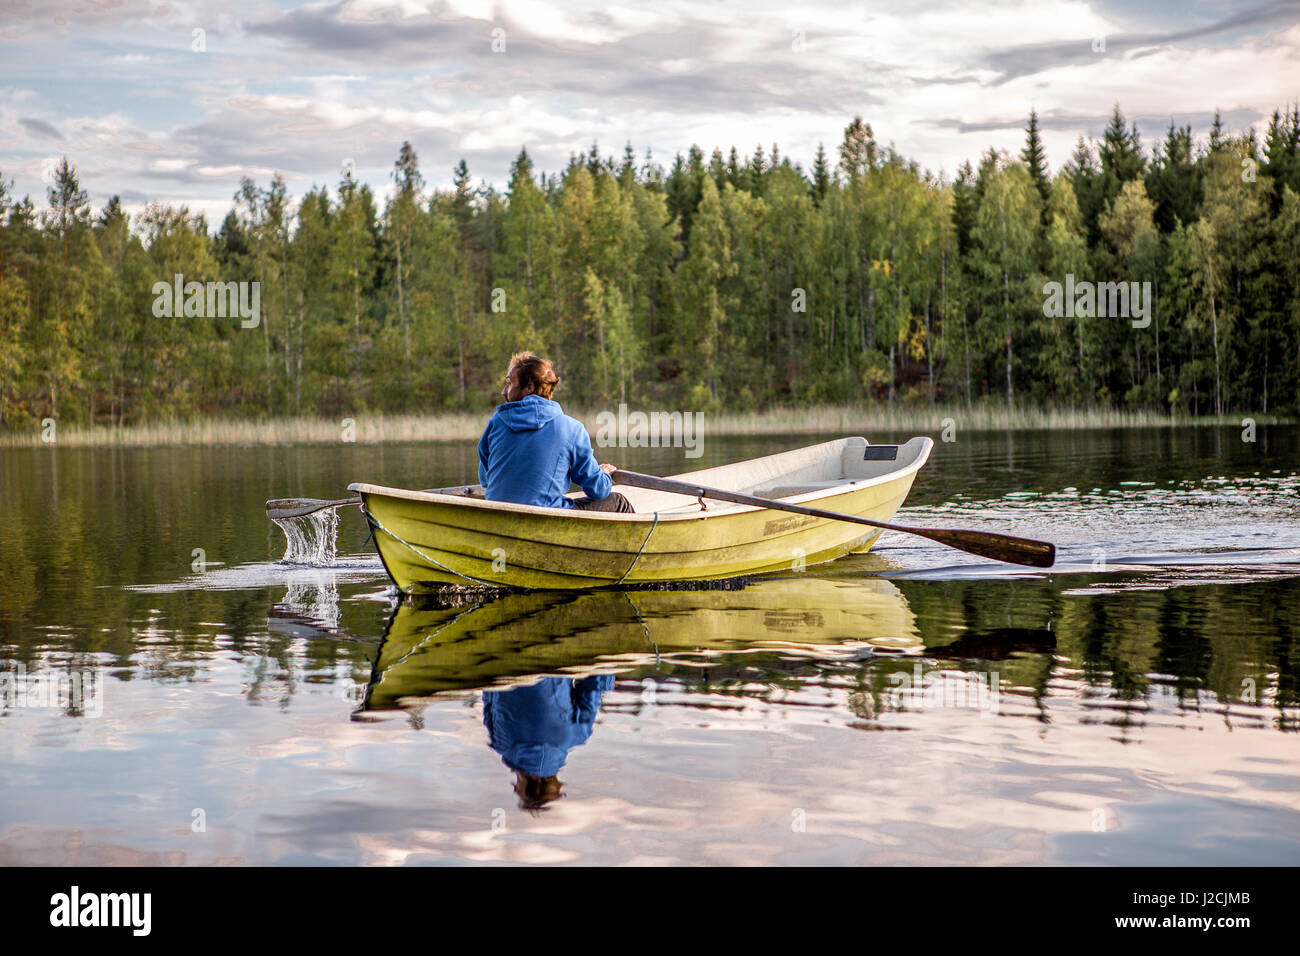 Finland, 10 days live in the Mökki, on an island, only can be reached by rowing boat. Linnansaari National Park, man rowing over the lake Stock Photo